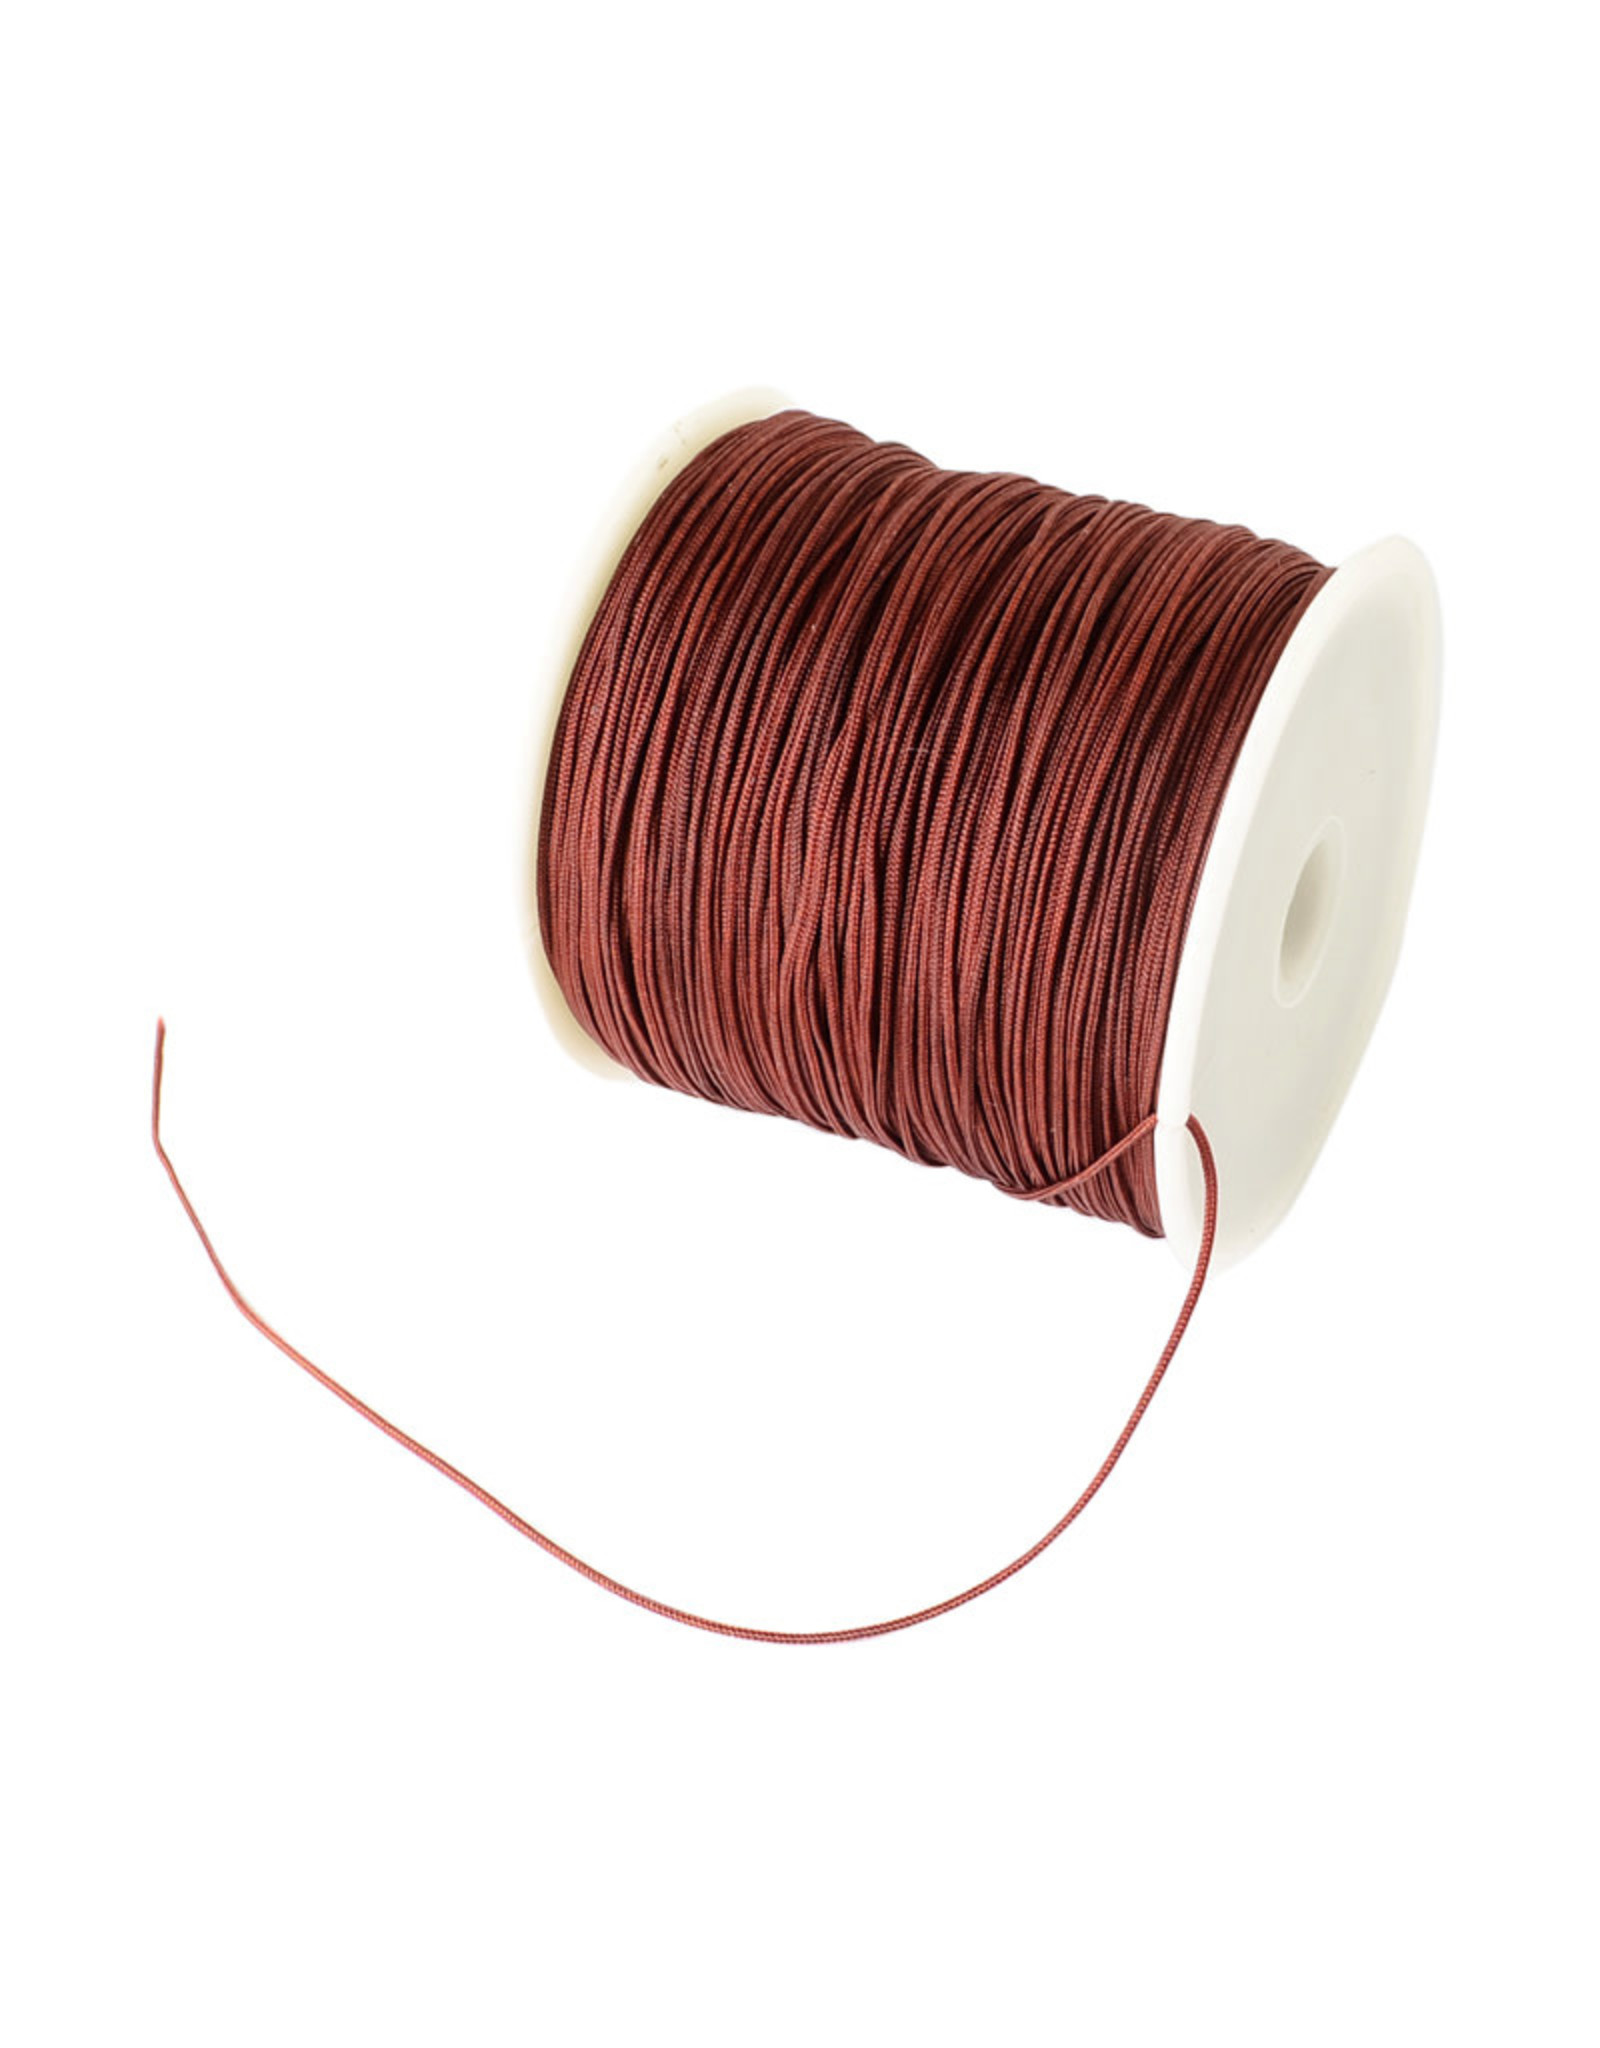 Chinese Knotting Cord .8mm Saddle Brown x100y